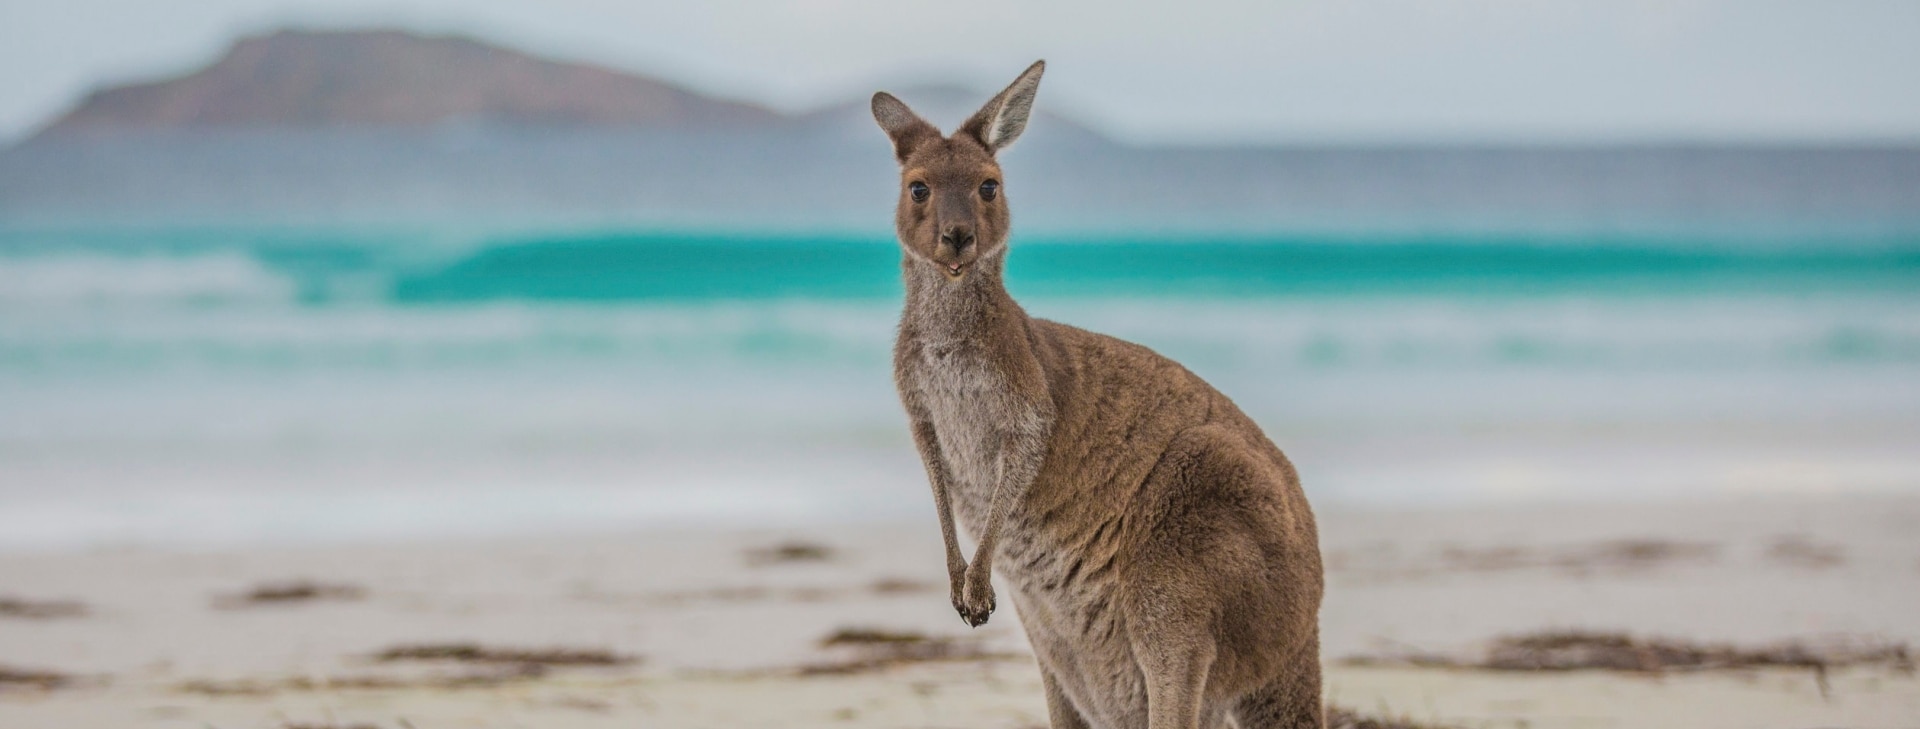 Lucky Bay, Cape Le Grand National Park, WA © Greg Snell, Tourism Western Australia